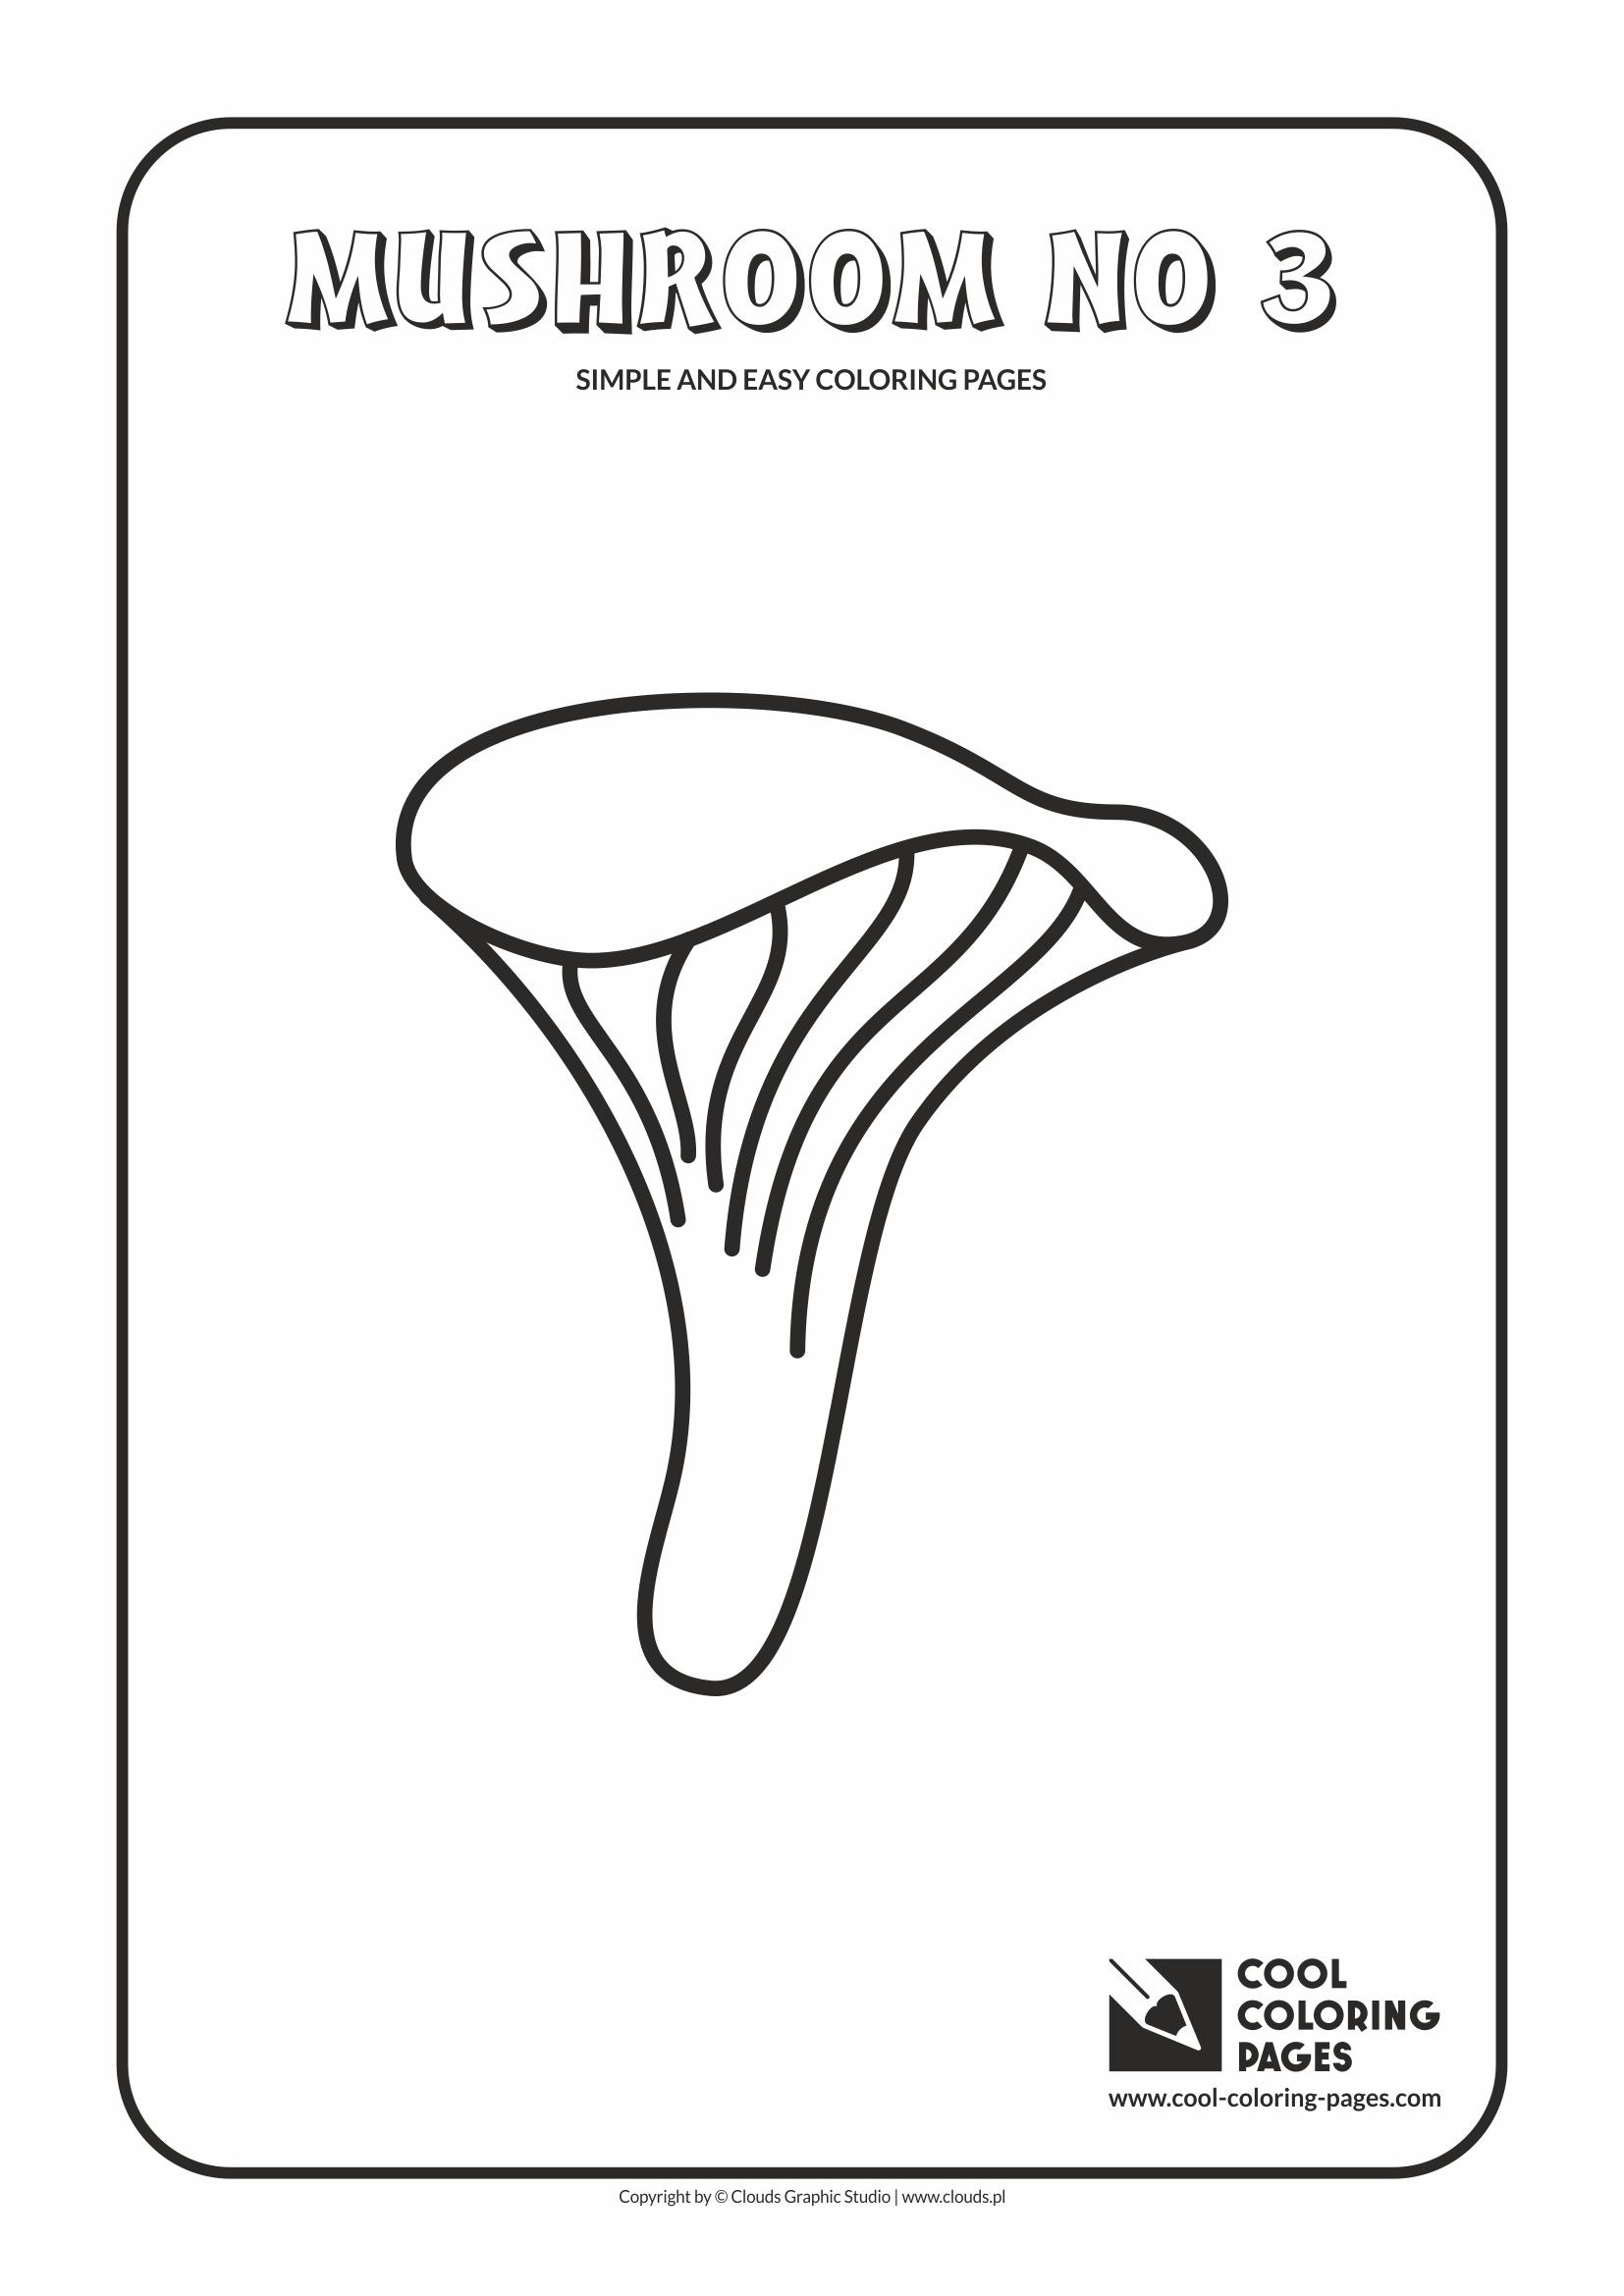 Simple and easy coloring pages for toddlers - Mushroom no 3